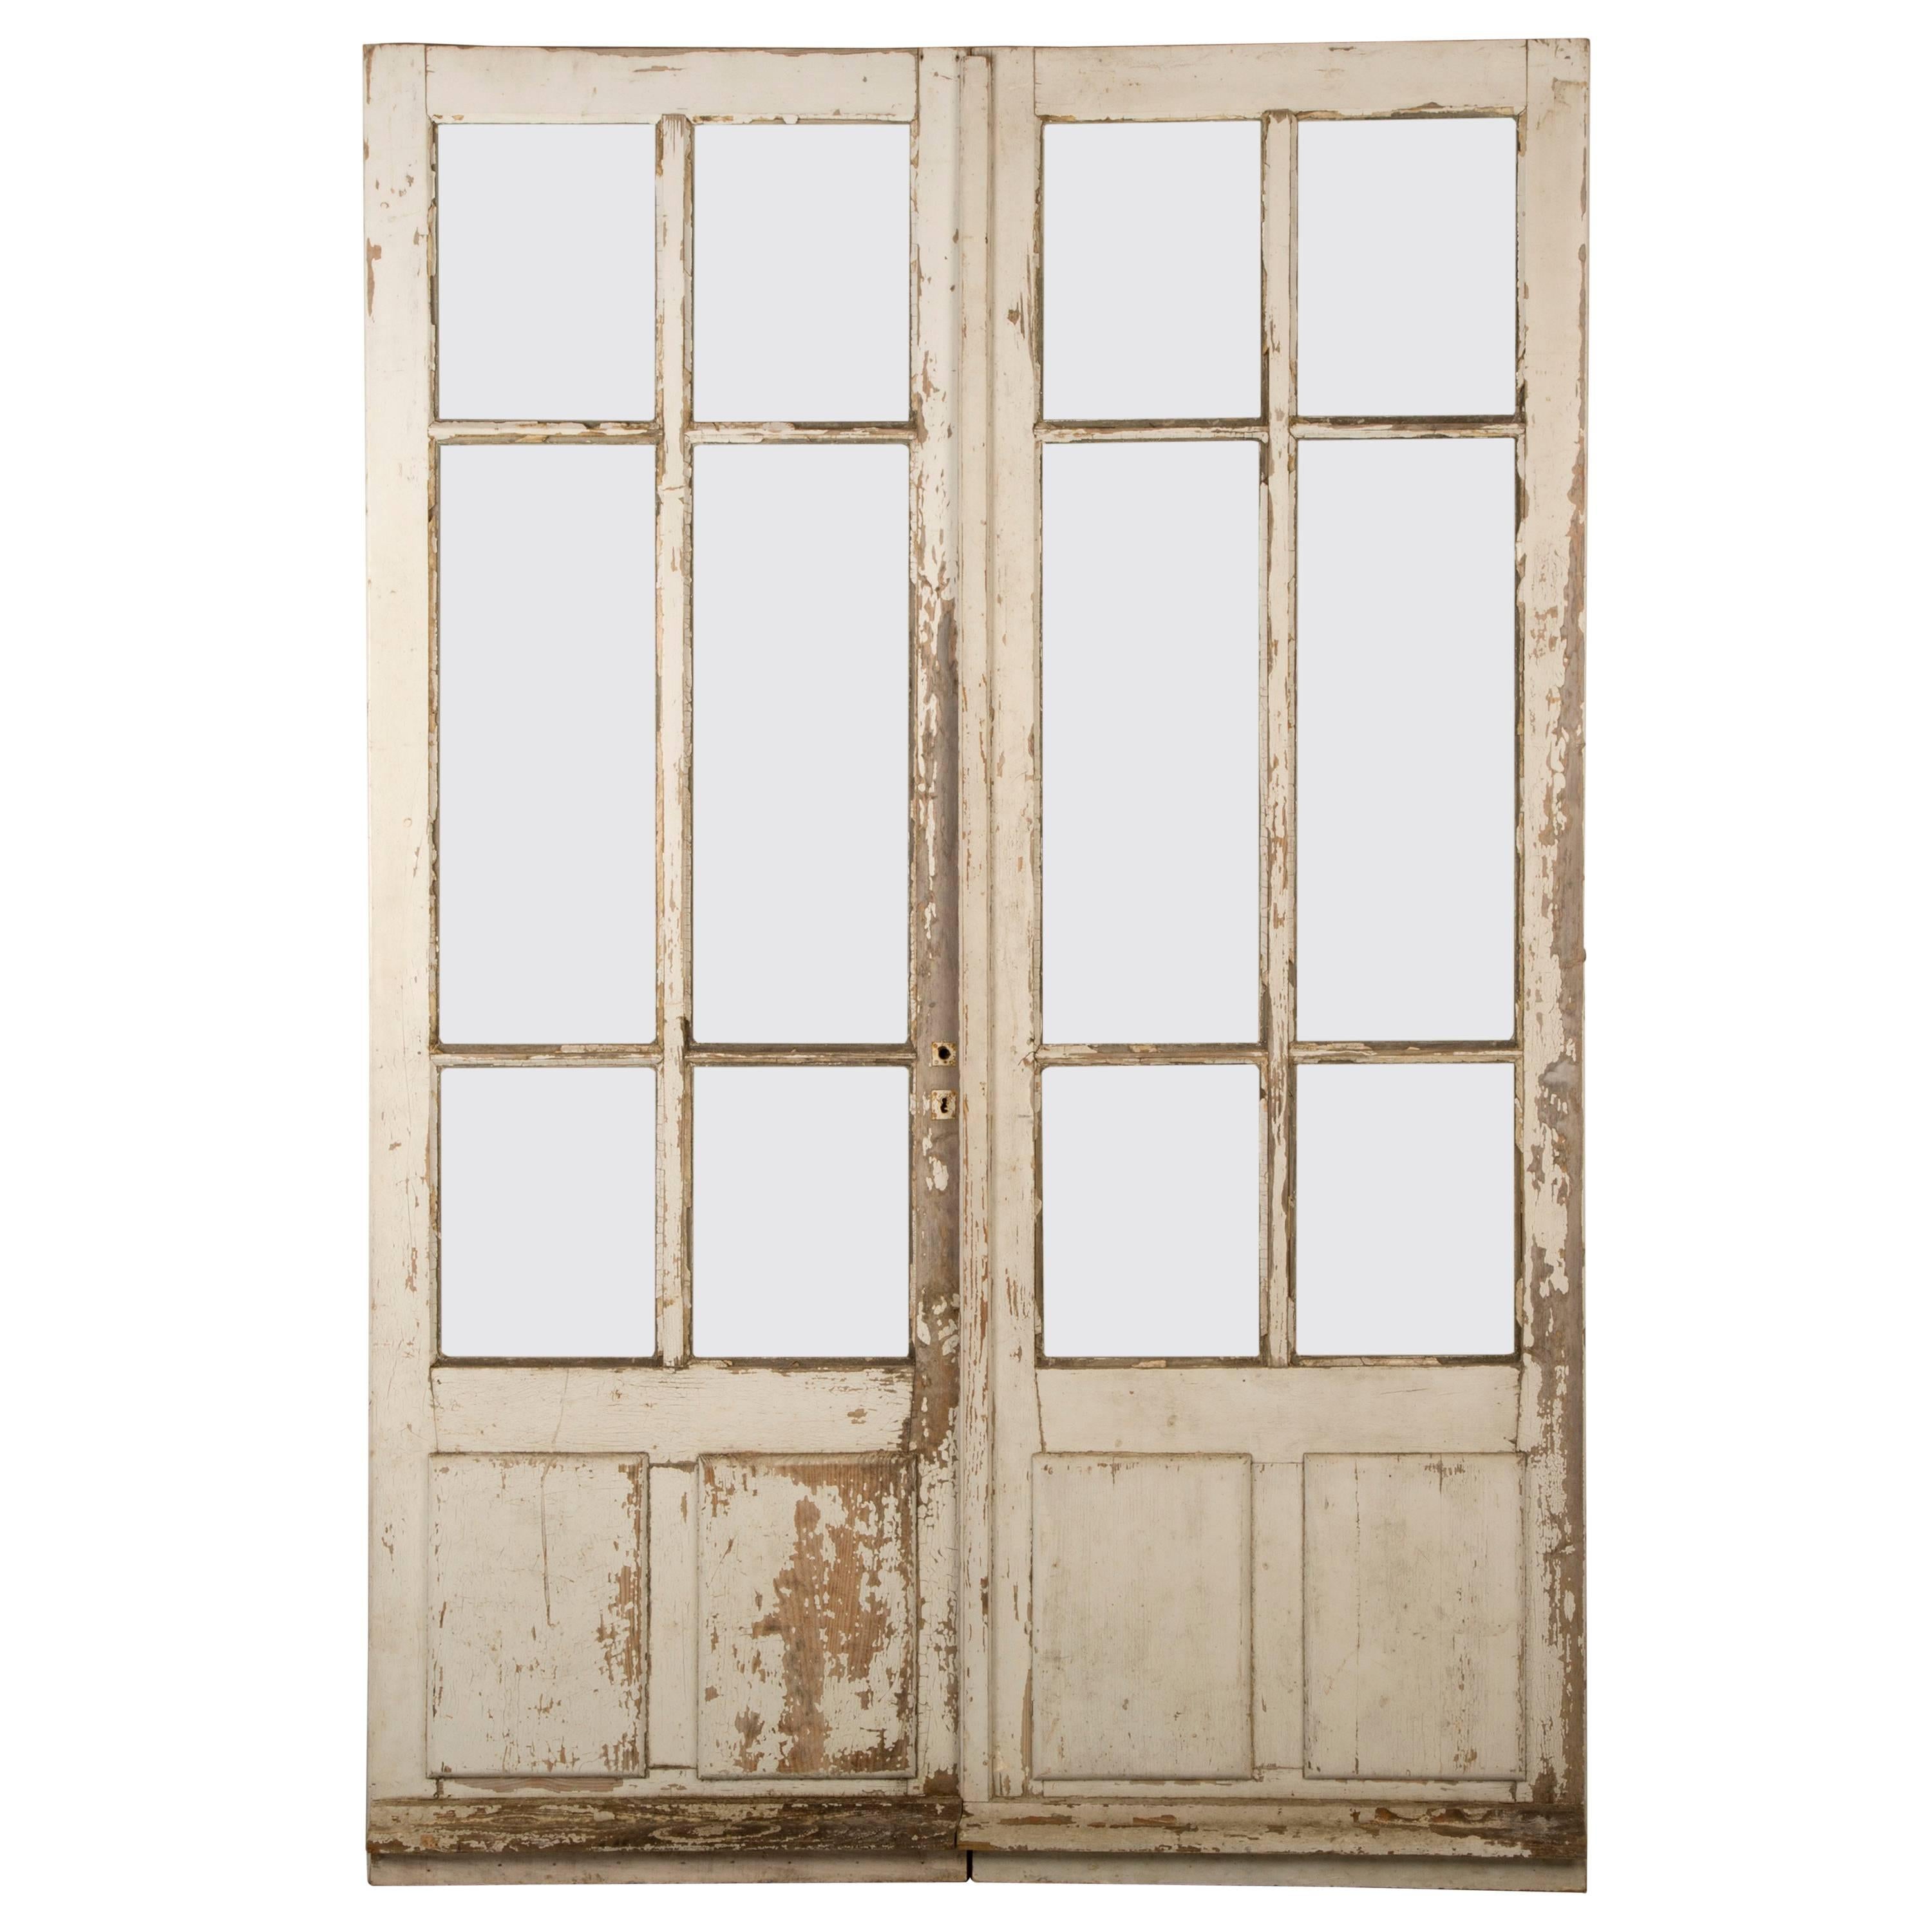 Antique Pair of French Doors from the Provence, circa 1800s